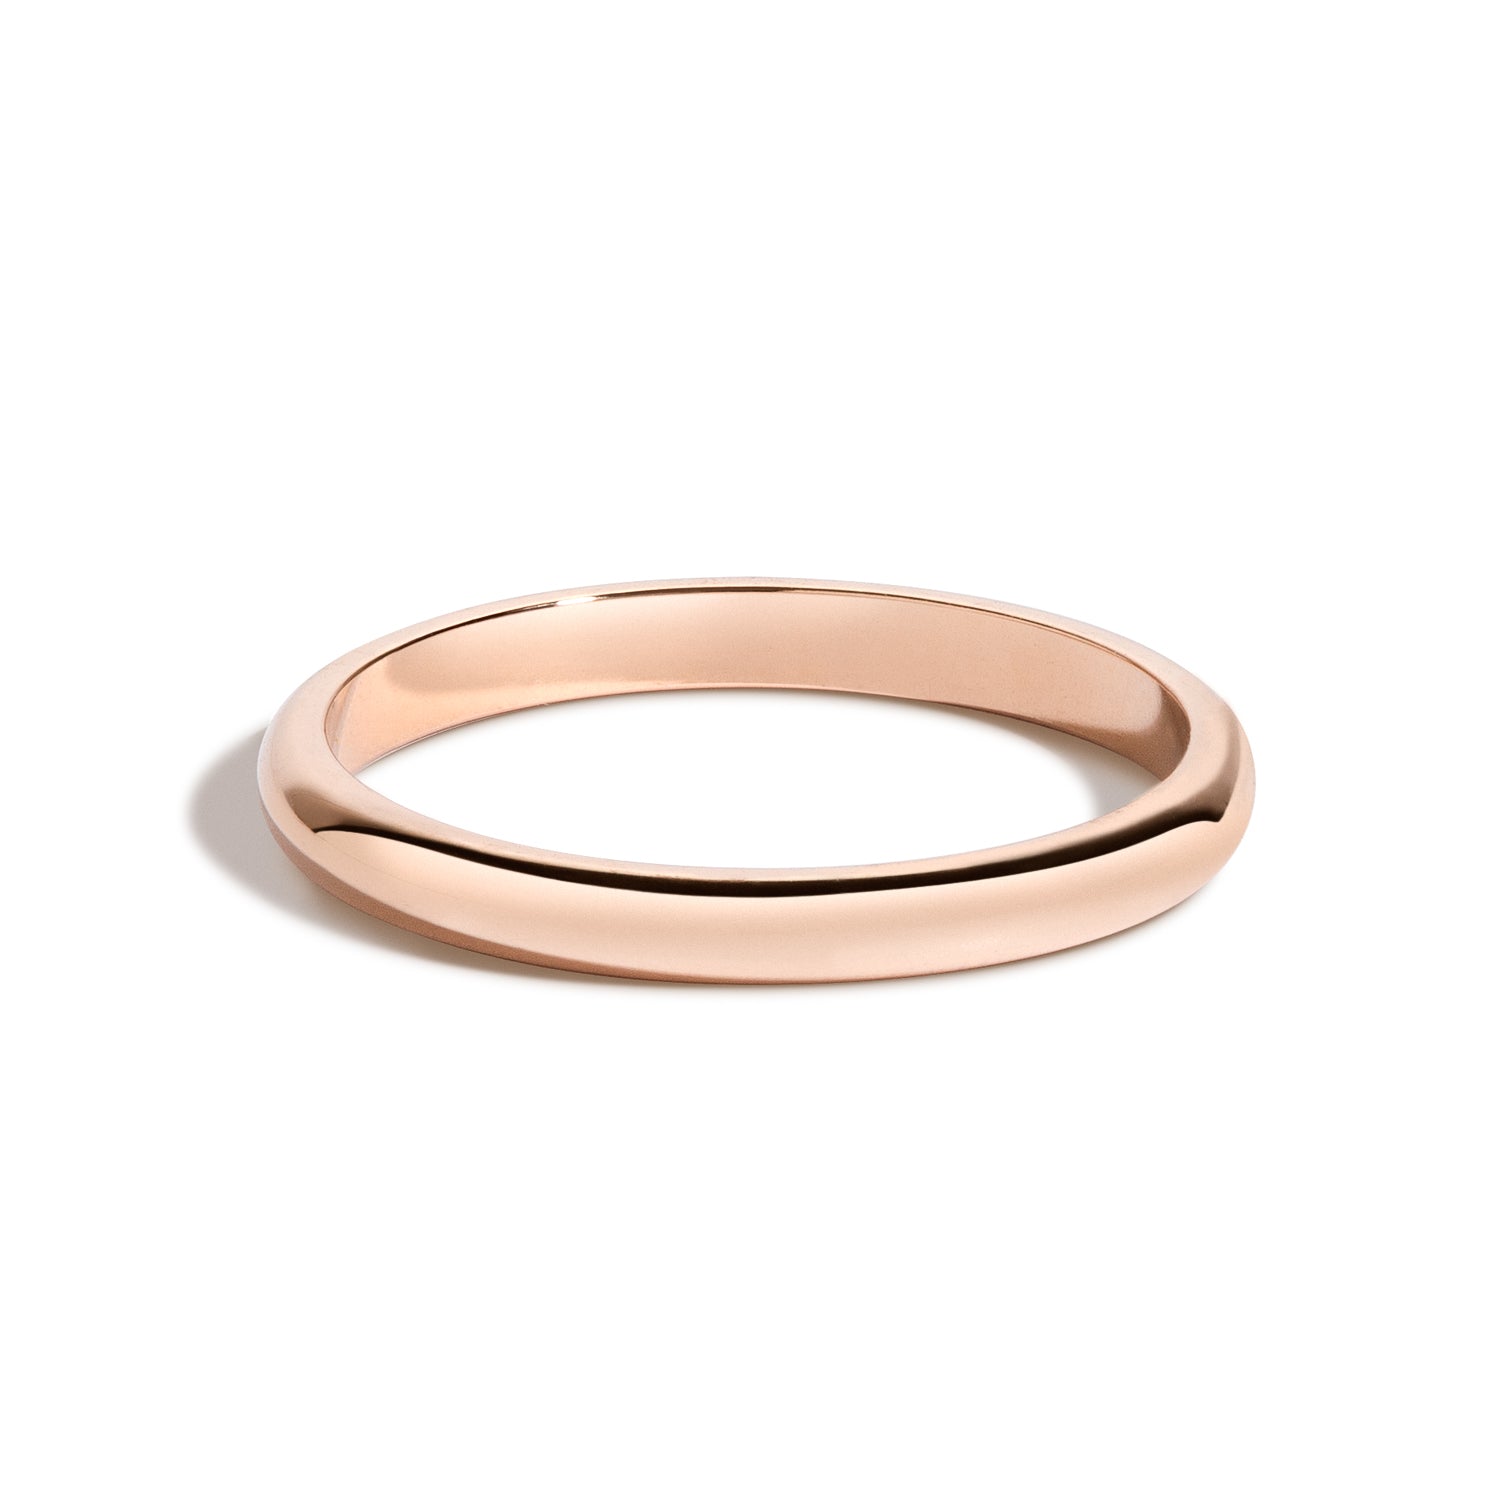 Shahla Karimi Jewelry 2mm Dome Band 14K Rose Gold 